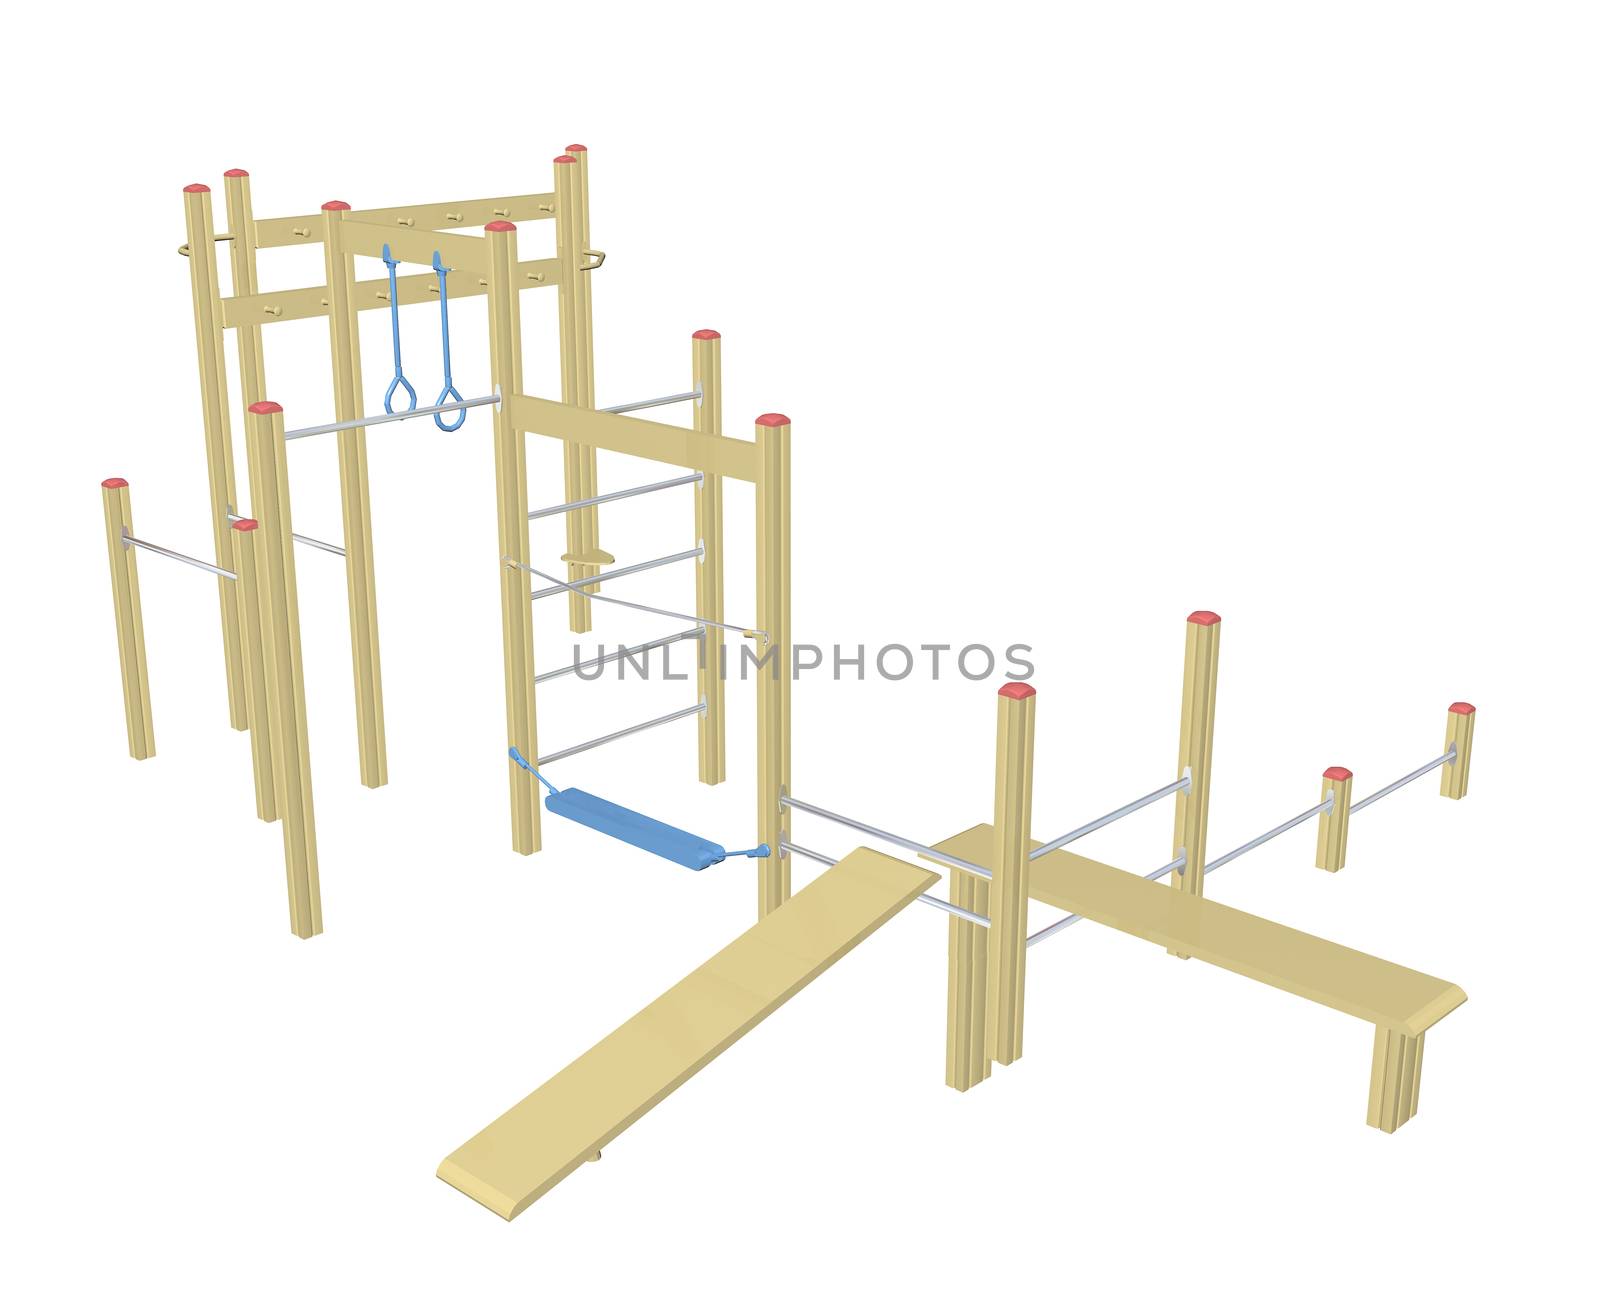 Sit-up and pull-up bars, 3D illustration, isolated against a white background